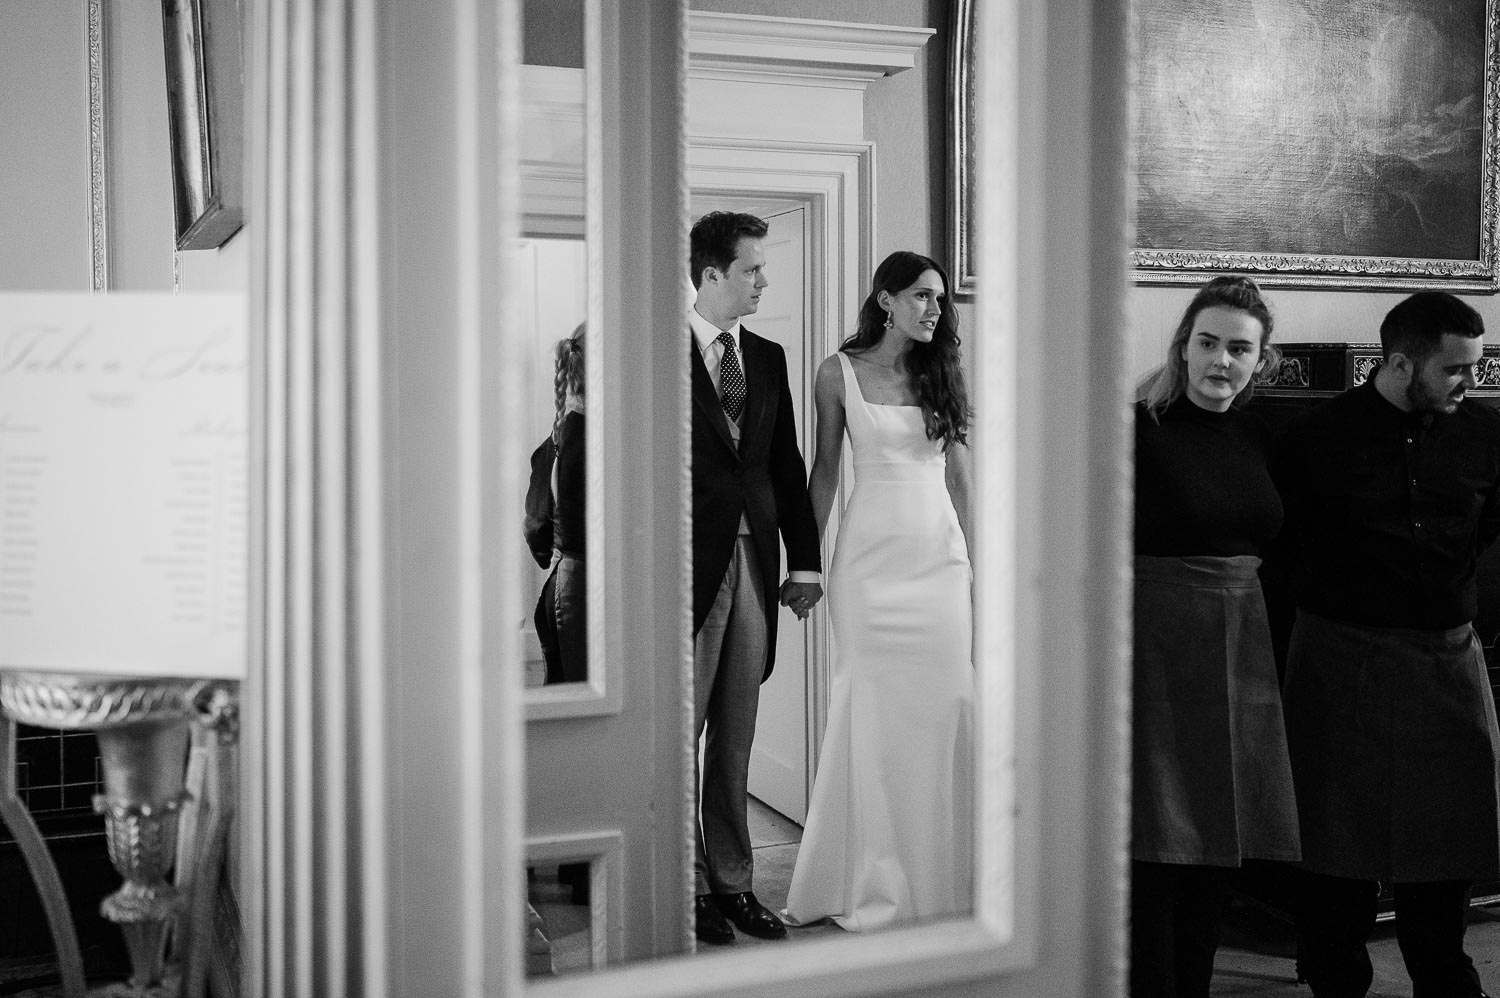 Bride and groom at a Came House wedding by Sophia Veres Photography.